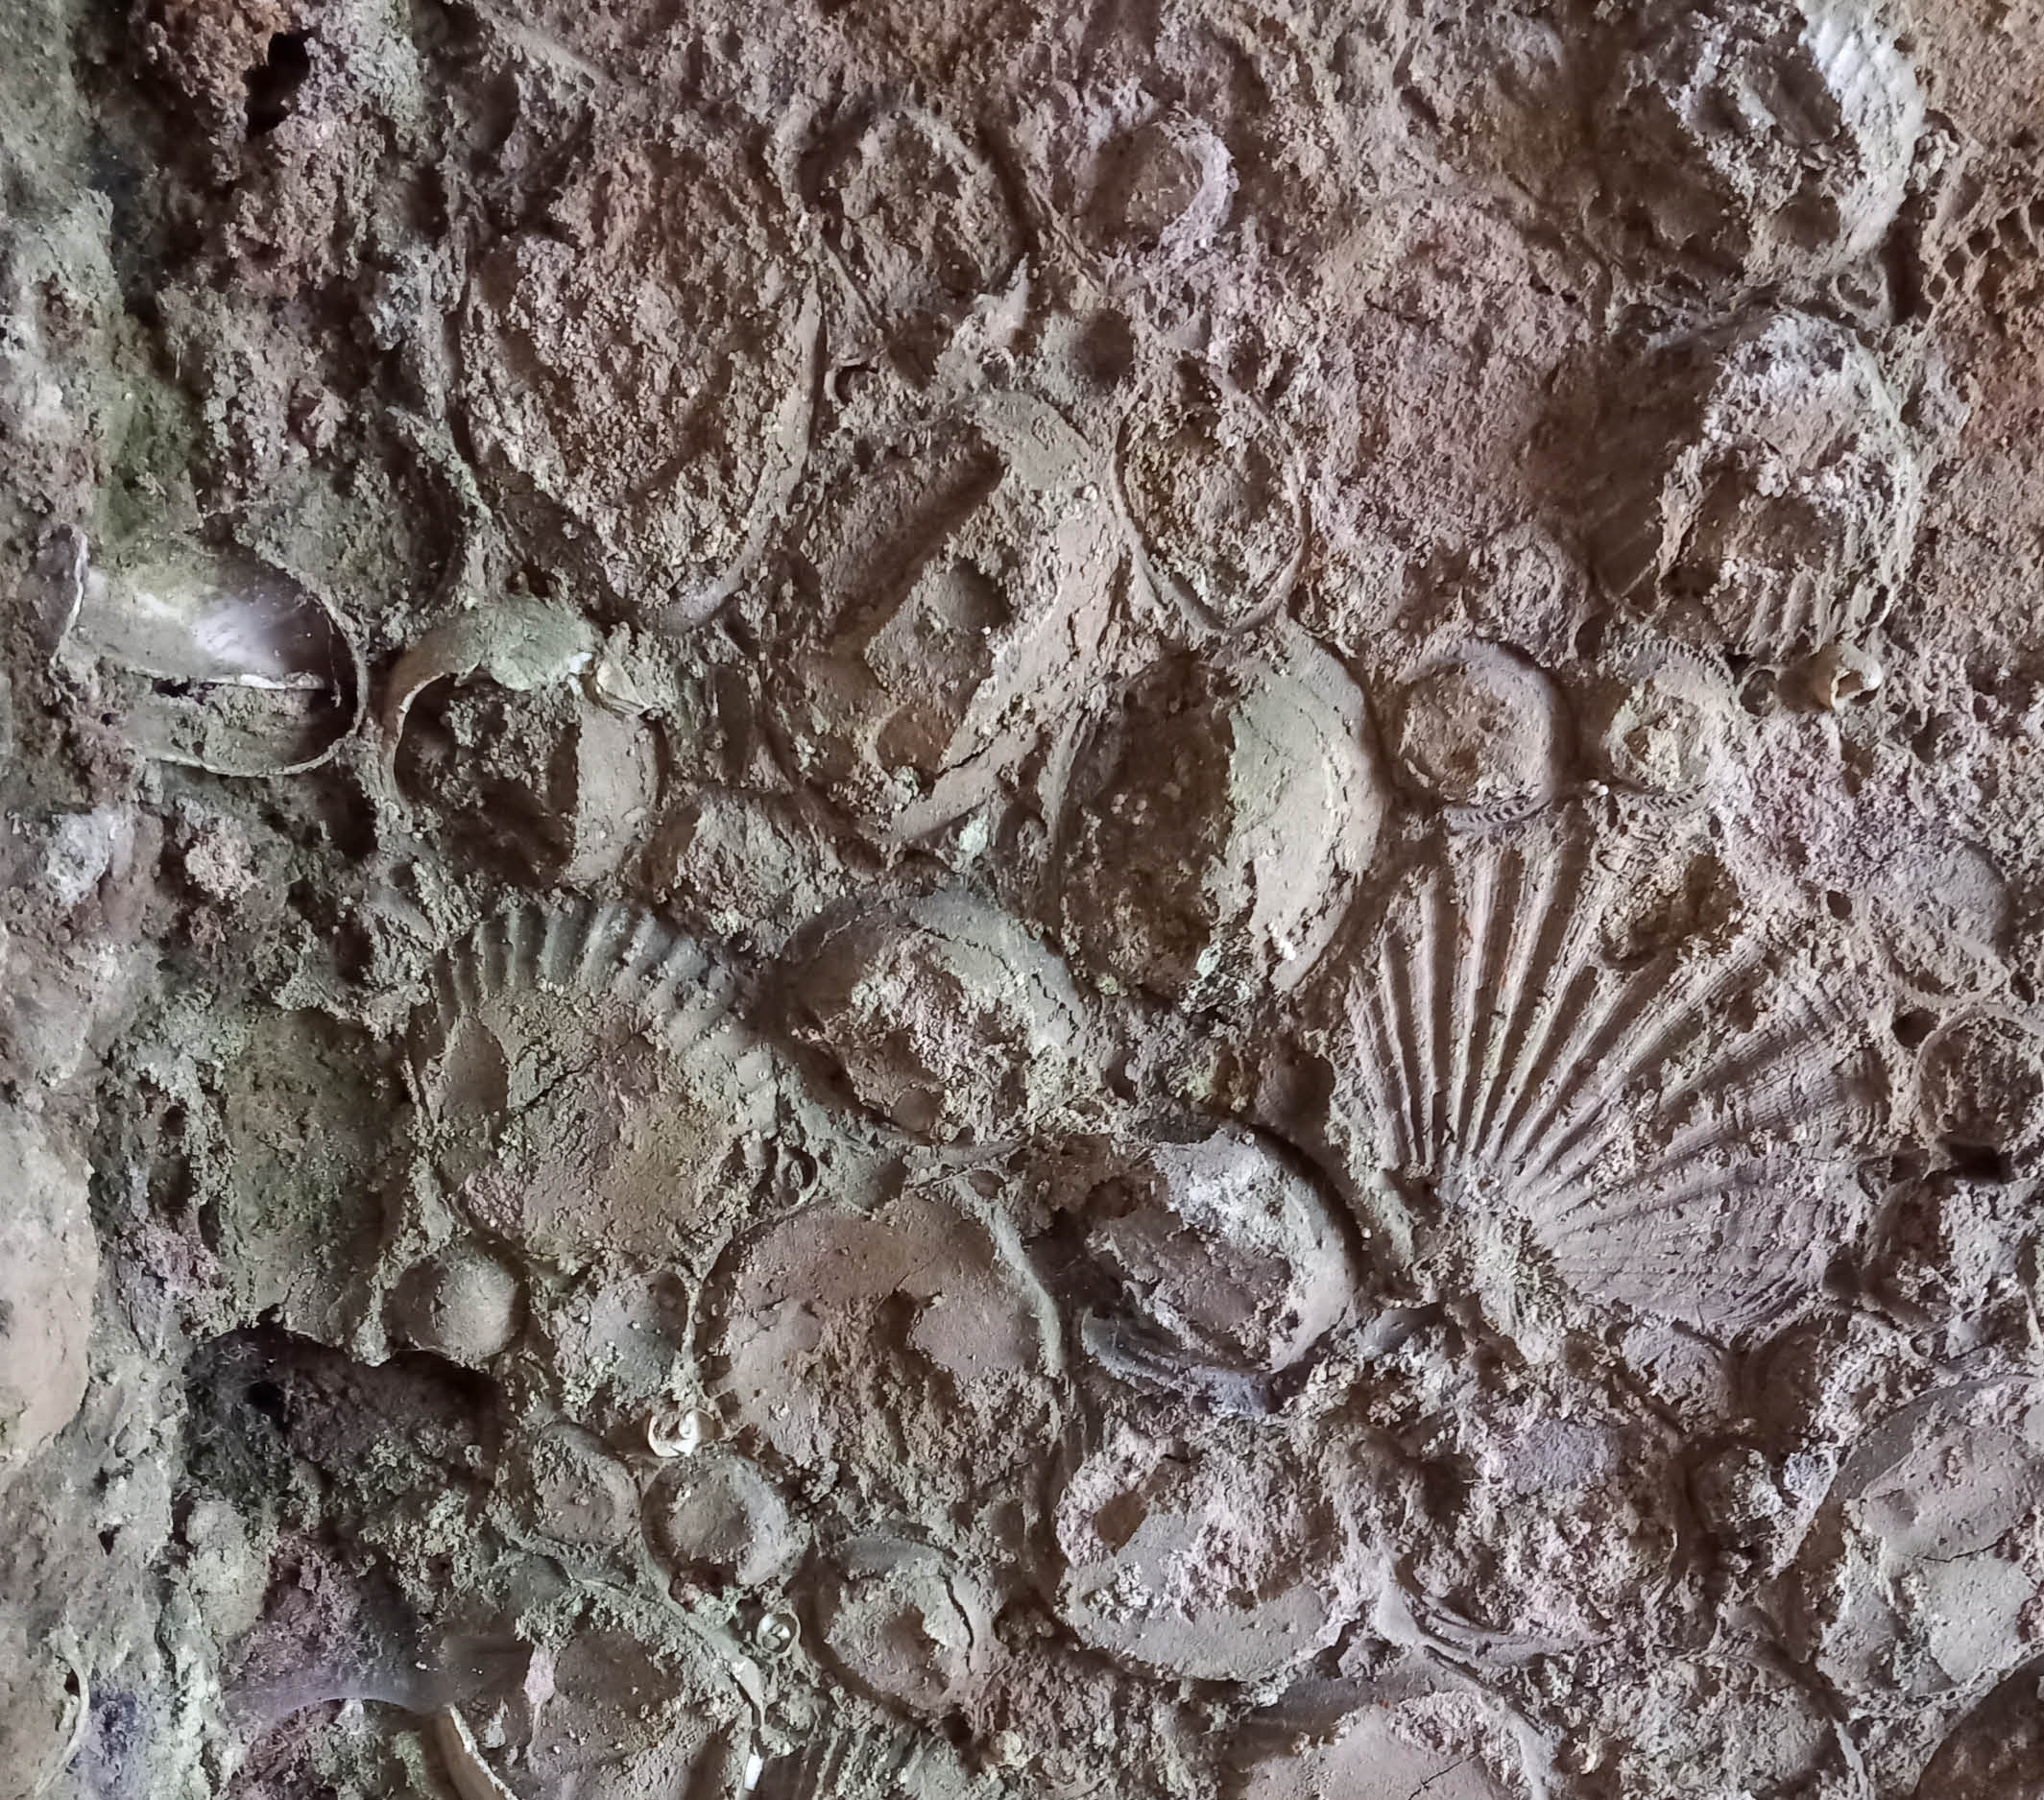 Imprints of shells on the remains of the grotto at Marble Hill